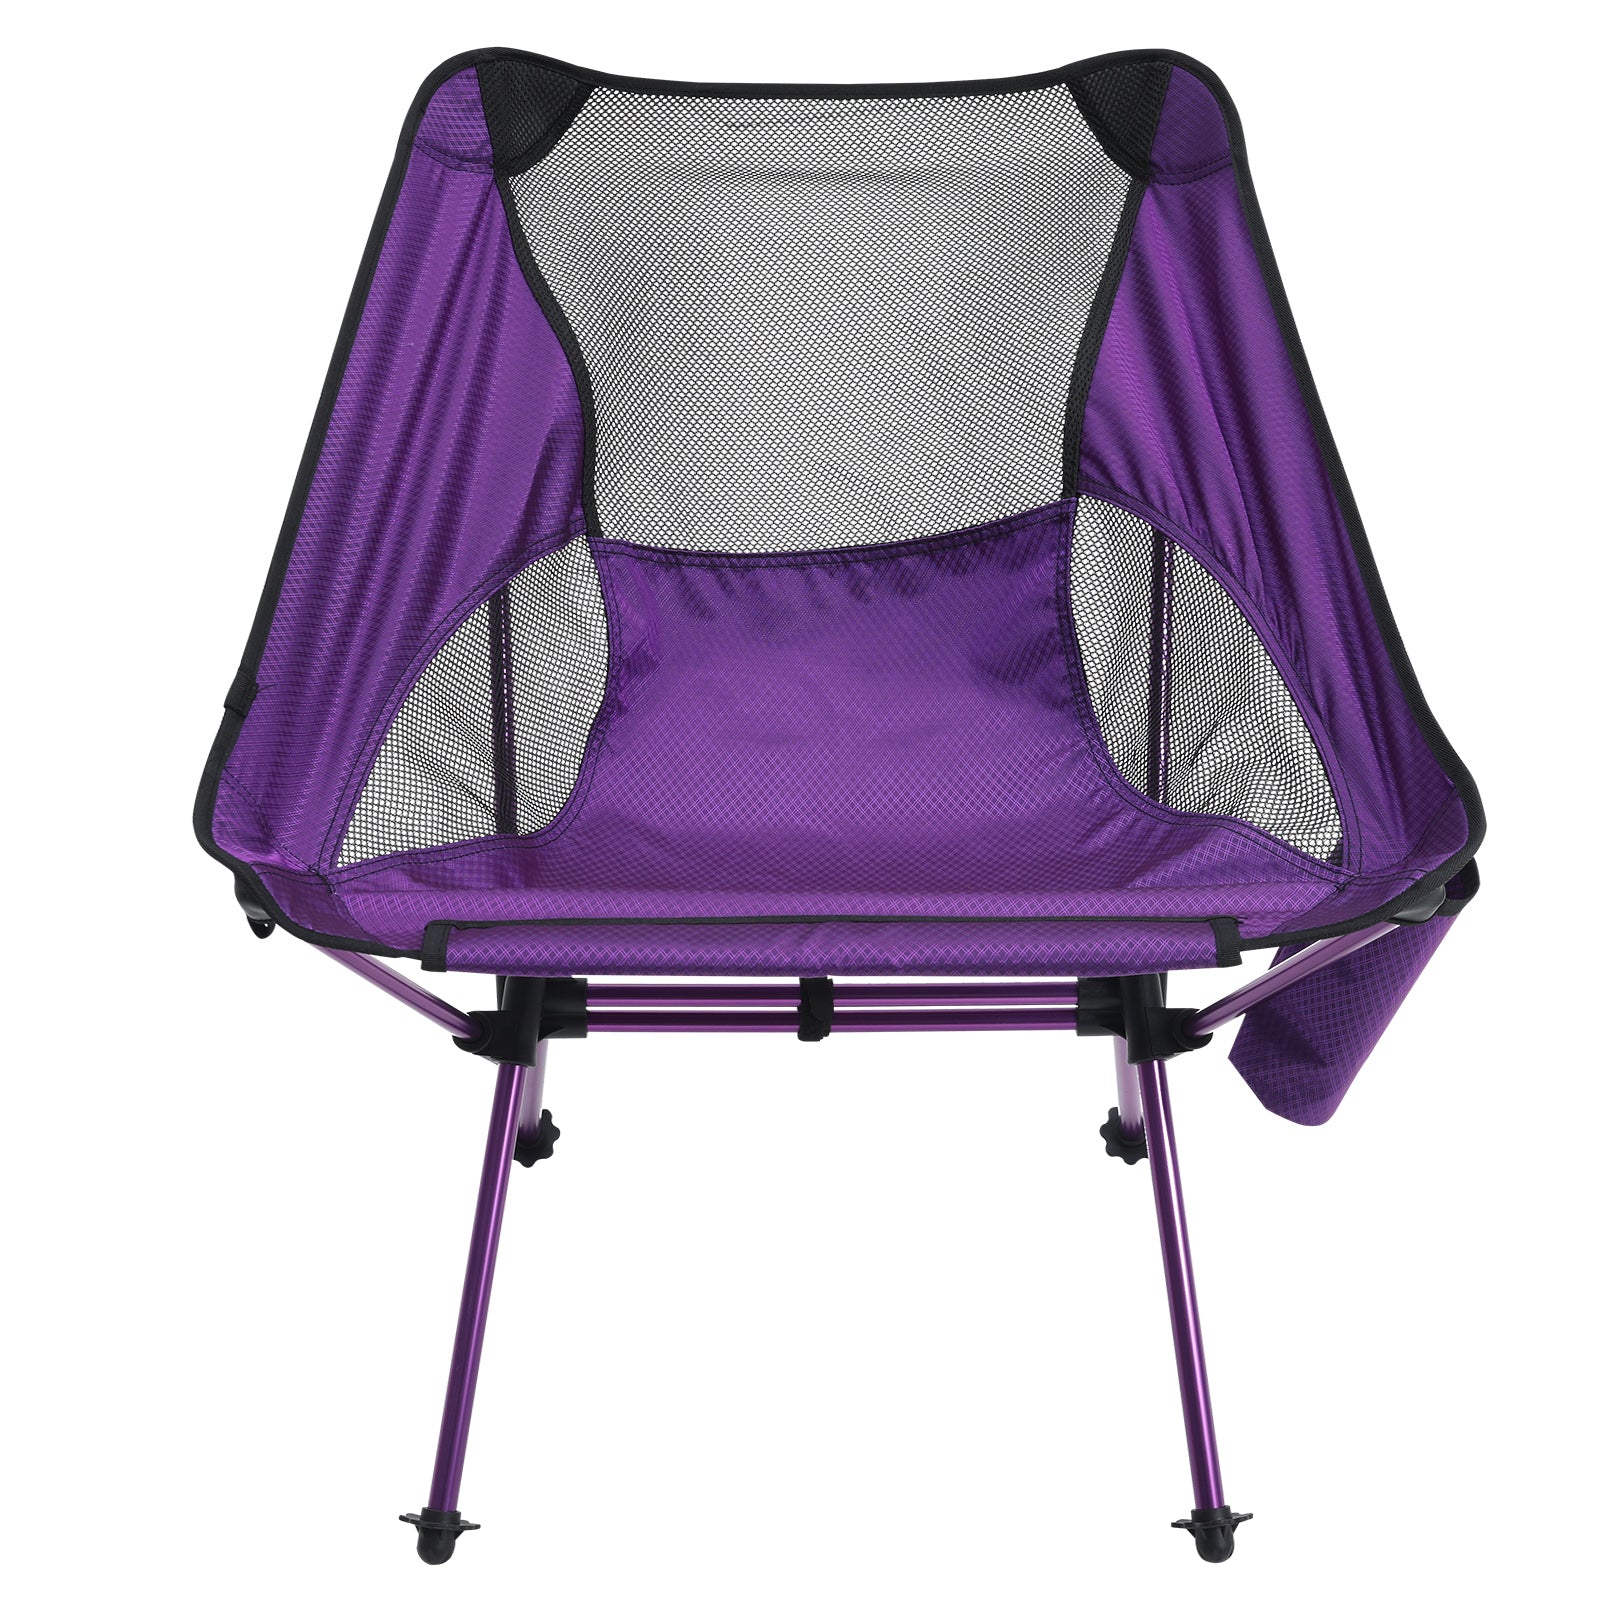 Ultralight Portable Camping Chairs-Large